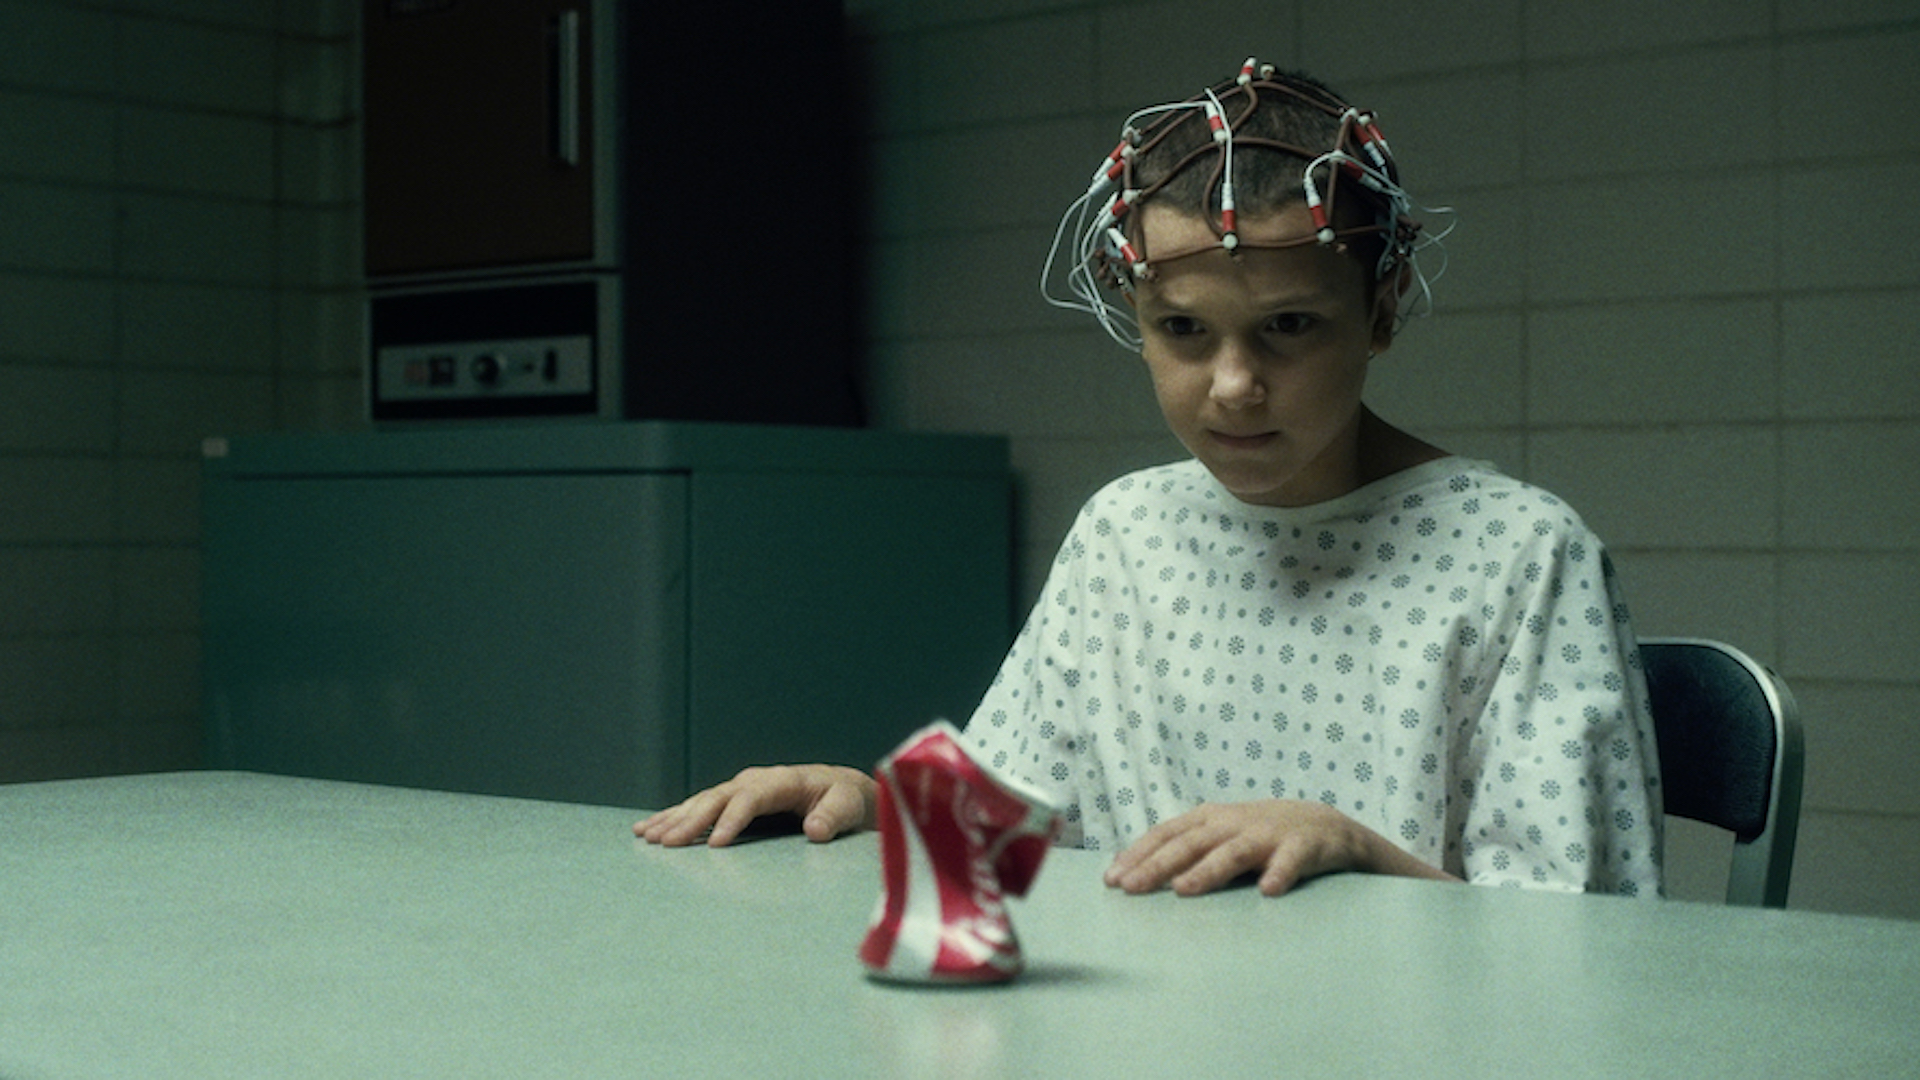 A scene from Stranger Things, featuring Millie Bobby Brown